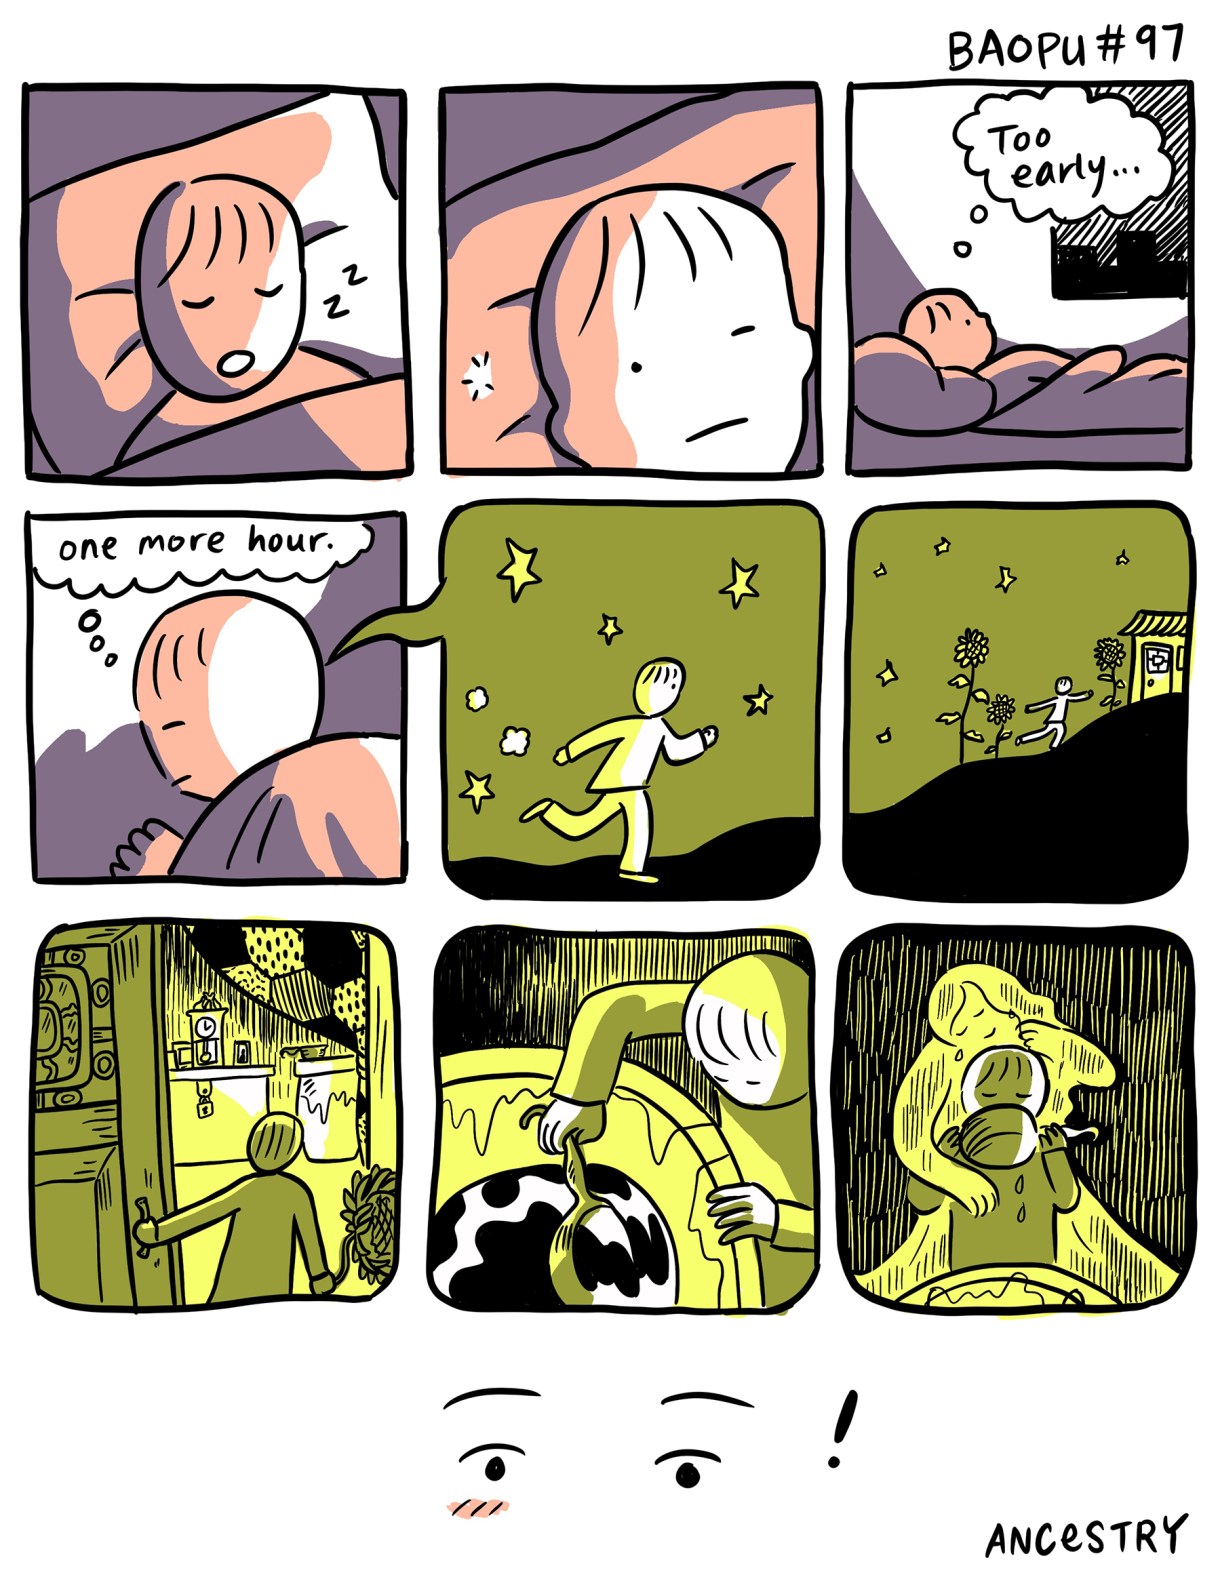 In a 12 panel comic, Yao falls asleep to a night sky that is shades of blush pink and purple. They awake too early and mumble "one more hour" before turning over and going back to asleep. The comic turns gold as we enter Yao's dream. Yao walks into a kitchen shaded in colors of Yellow, also at night, and then finds themself over a large pot of dark soup, which they stir with a spoon. They drink the soup and are hugged by a woman in their family. Yao wakes up with alert eyes and the final panel says "Ancestry!"